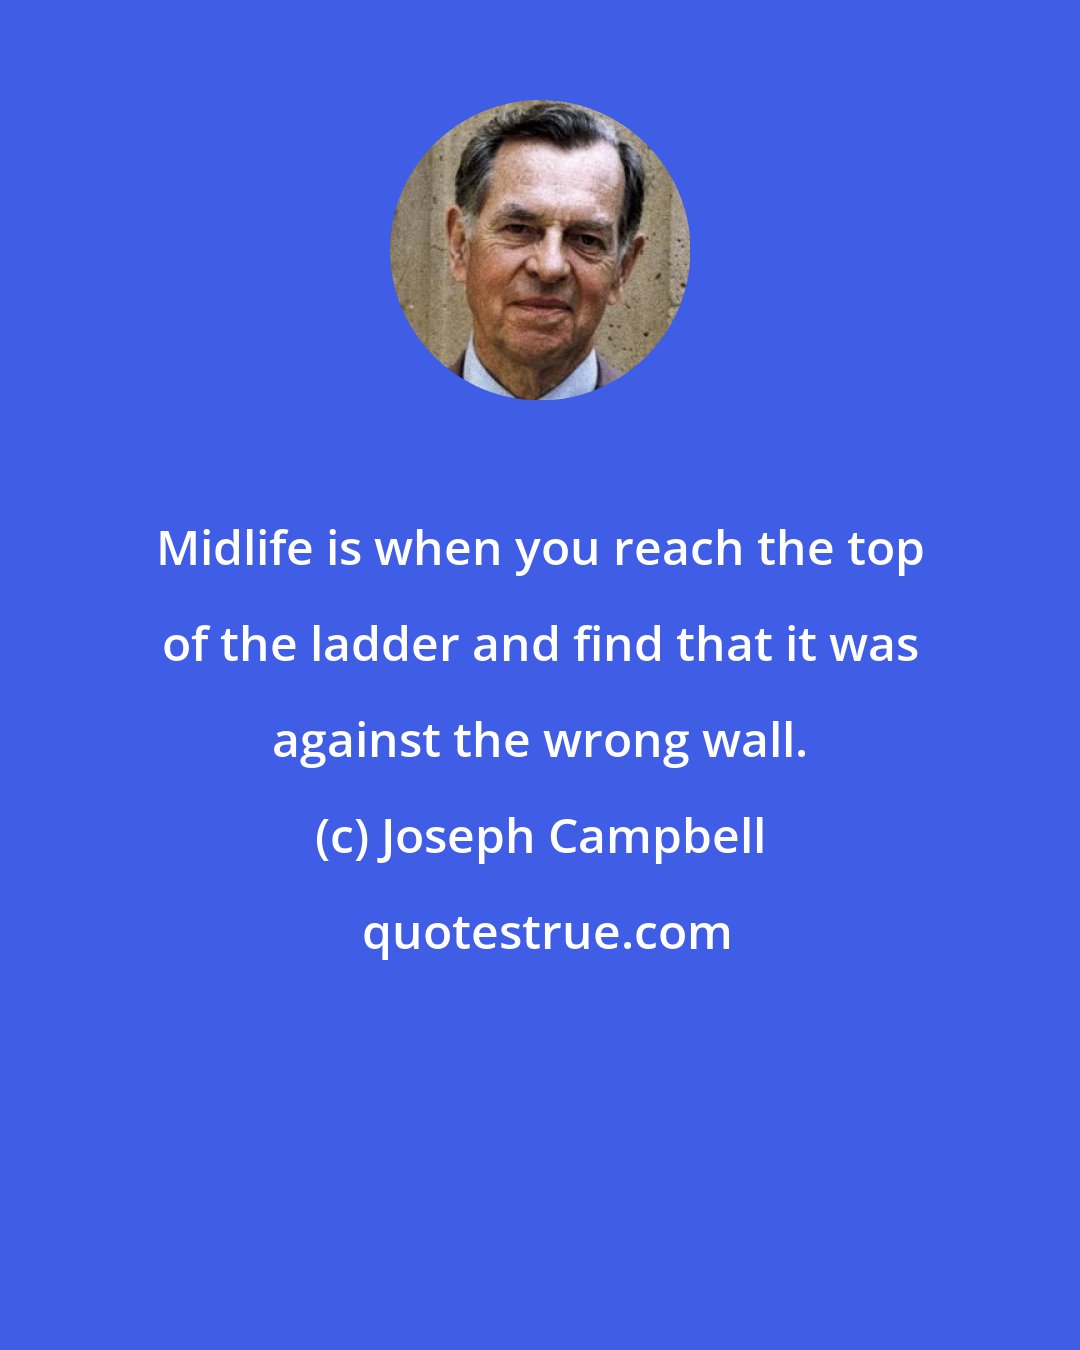 Joseph Campbell: Midlife is when you reach the top of the ladder and find that it was against the wrong wall.